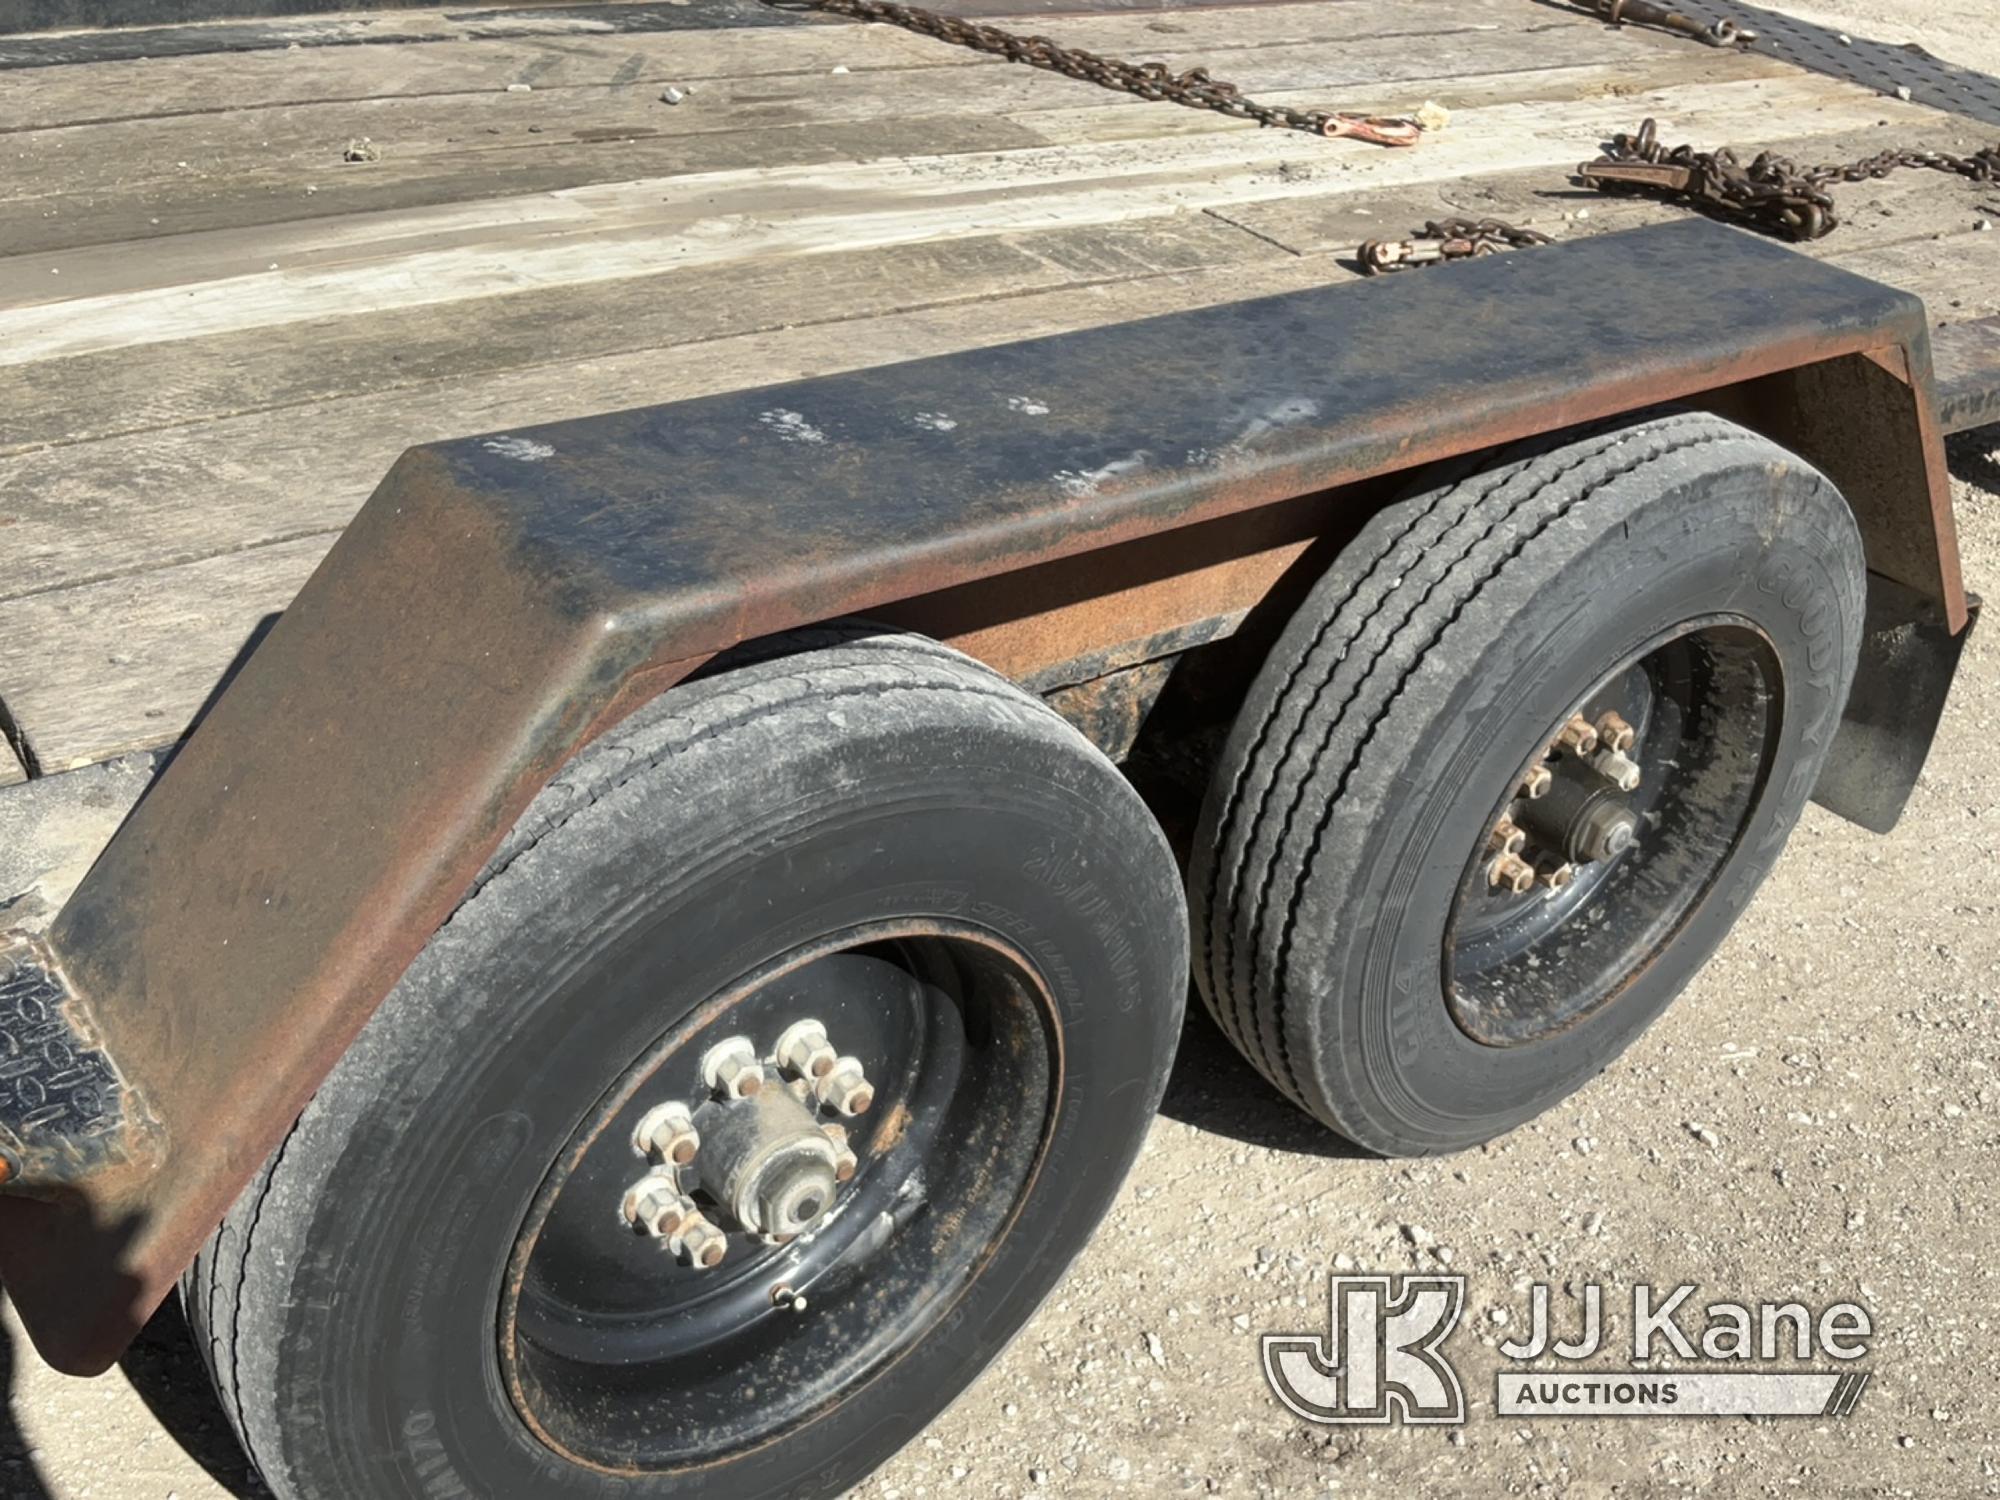 (Des Moines, IA) 2011 Felling FT-16 T/A Tagalong Equipment Trailer, Trailer 29ft 6in x 8ft 5in Deck